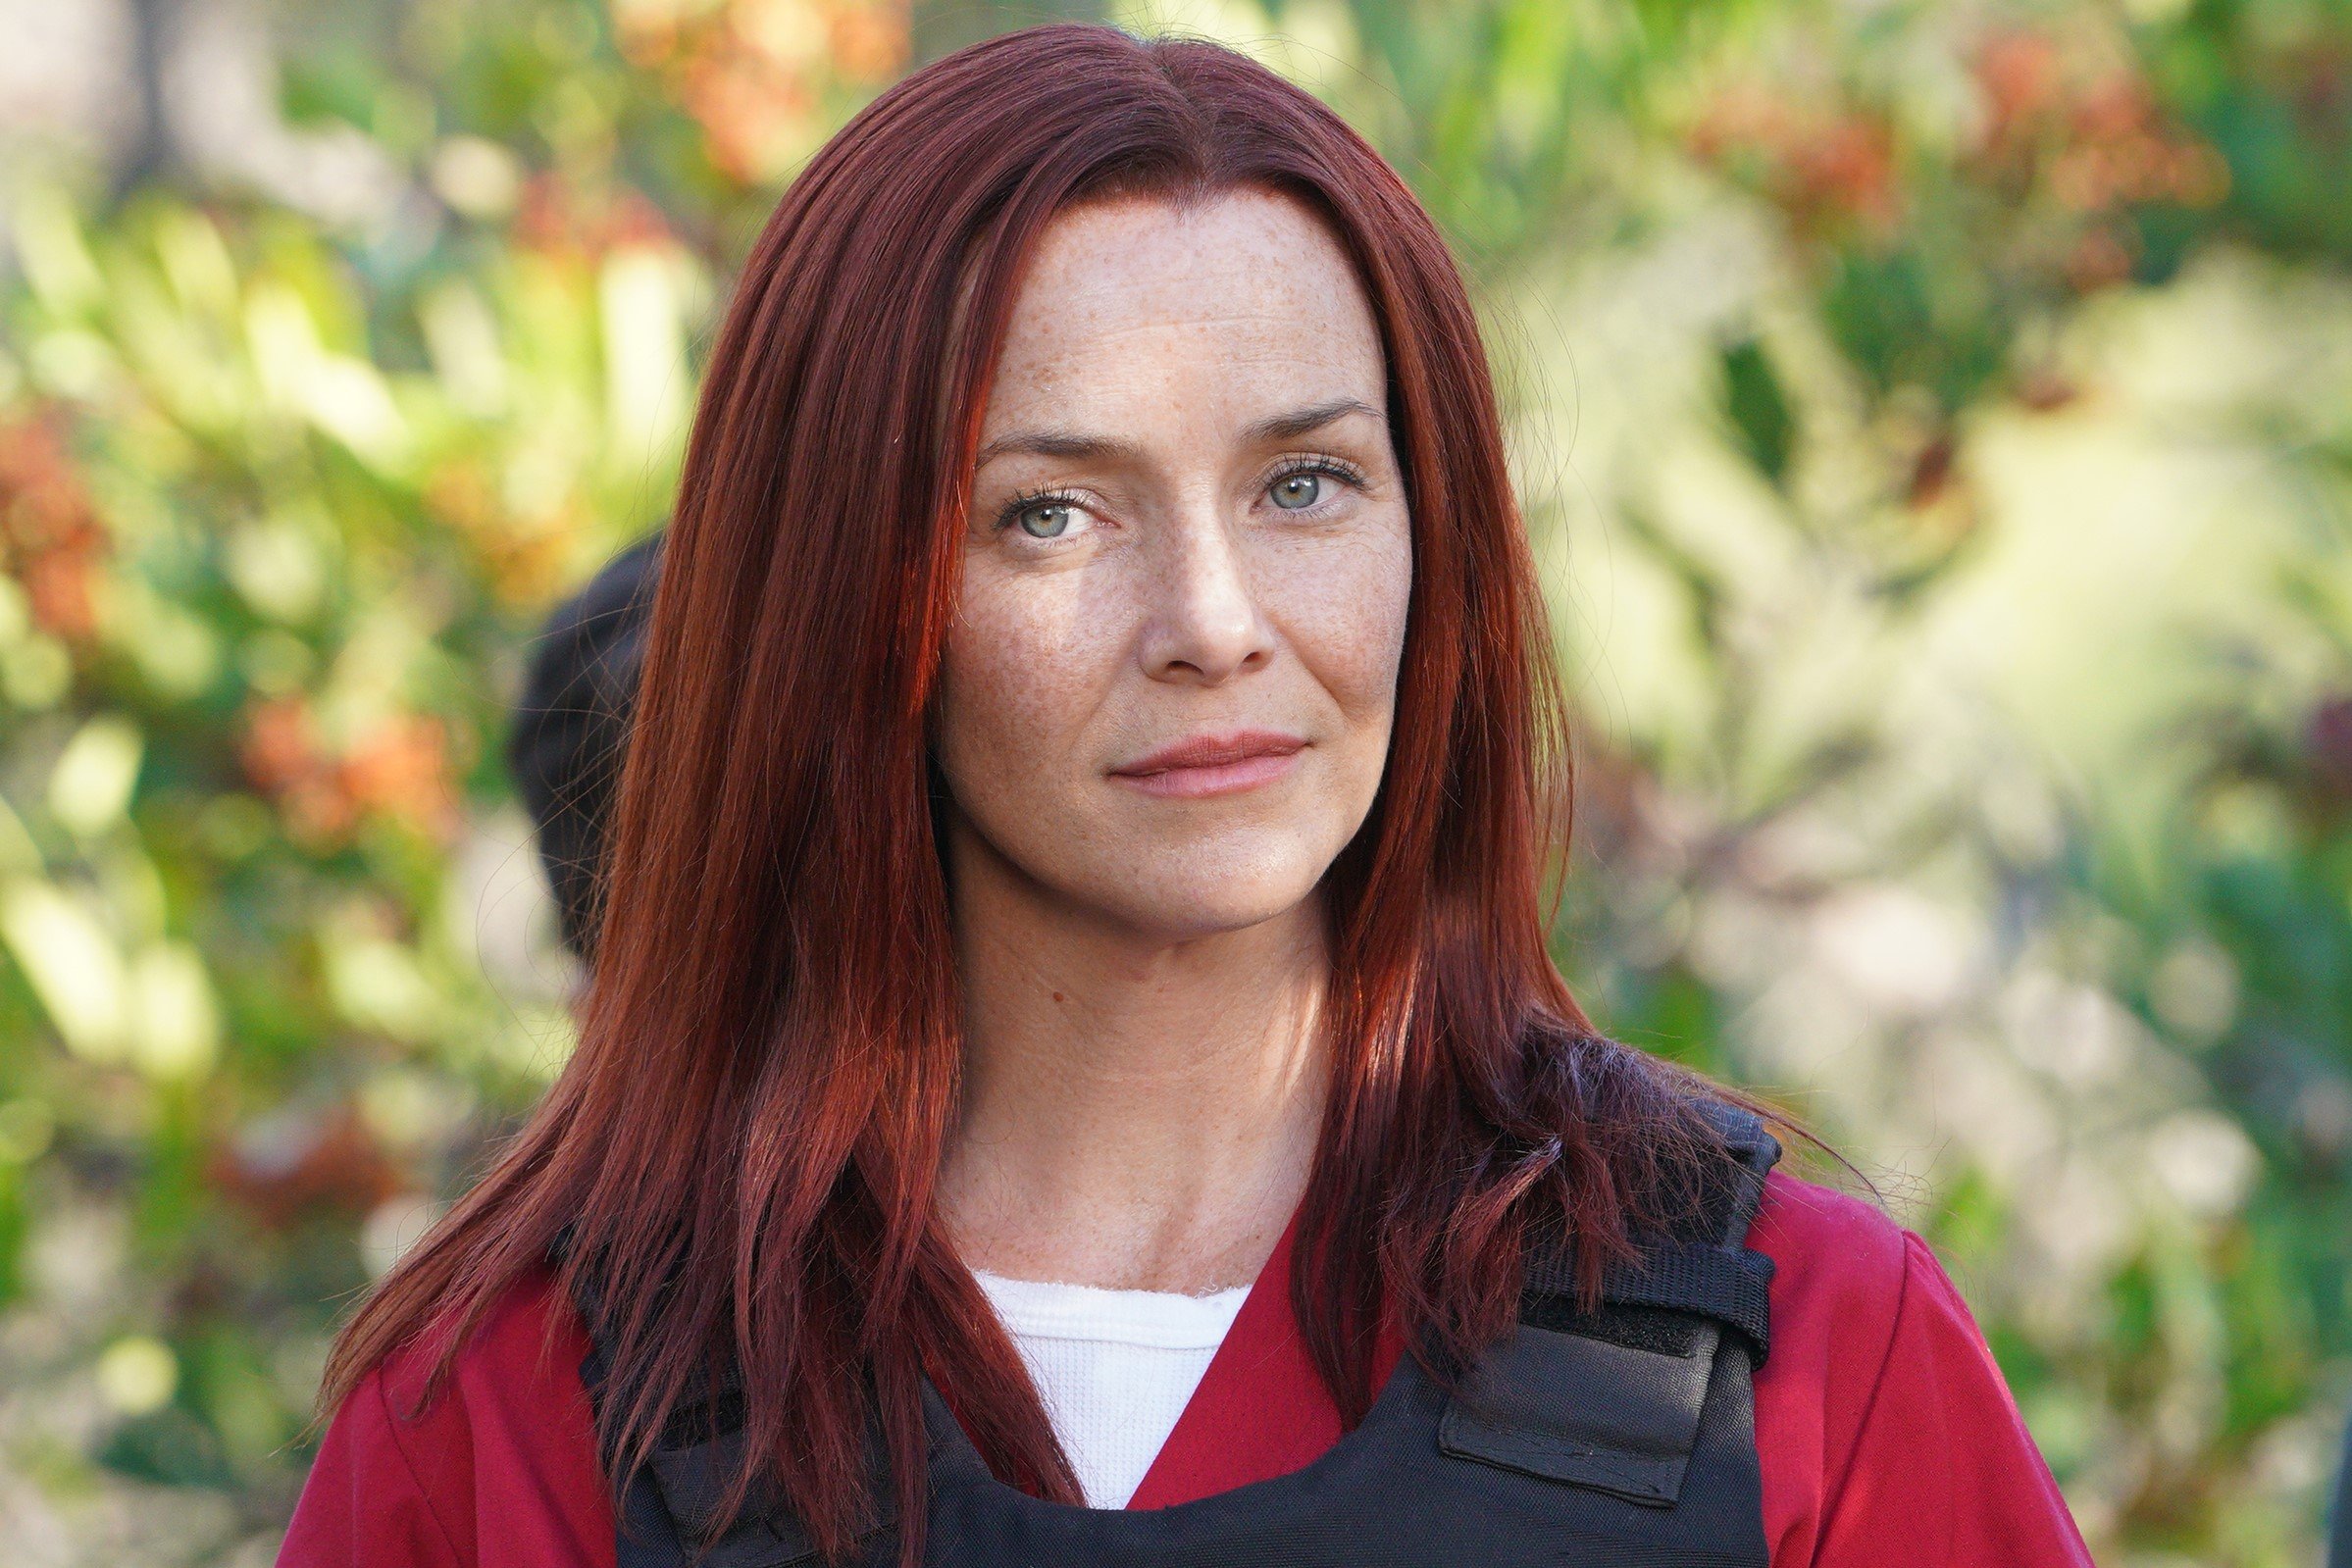 Annie Wersching, in character as Rosalind Dyer in 'The Rookie' Season 2, wears a red prison jumpsuit and black bulletproof vest.